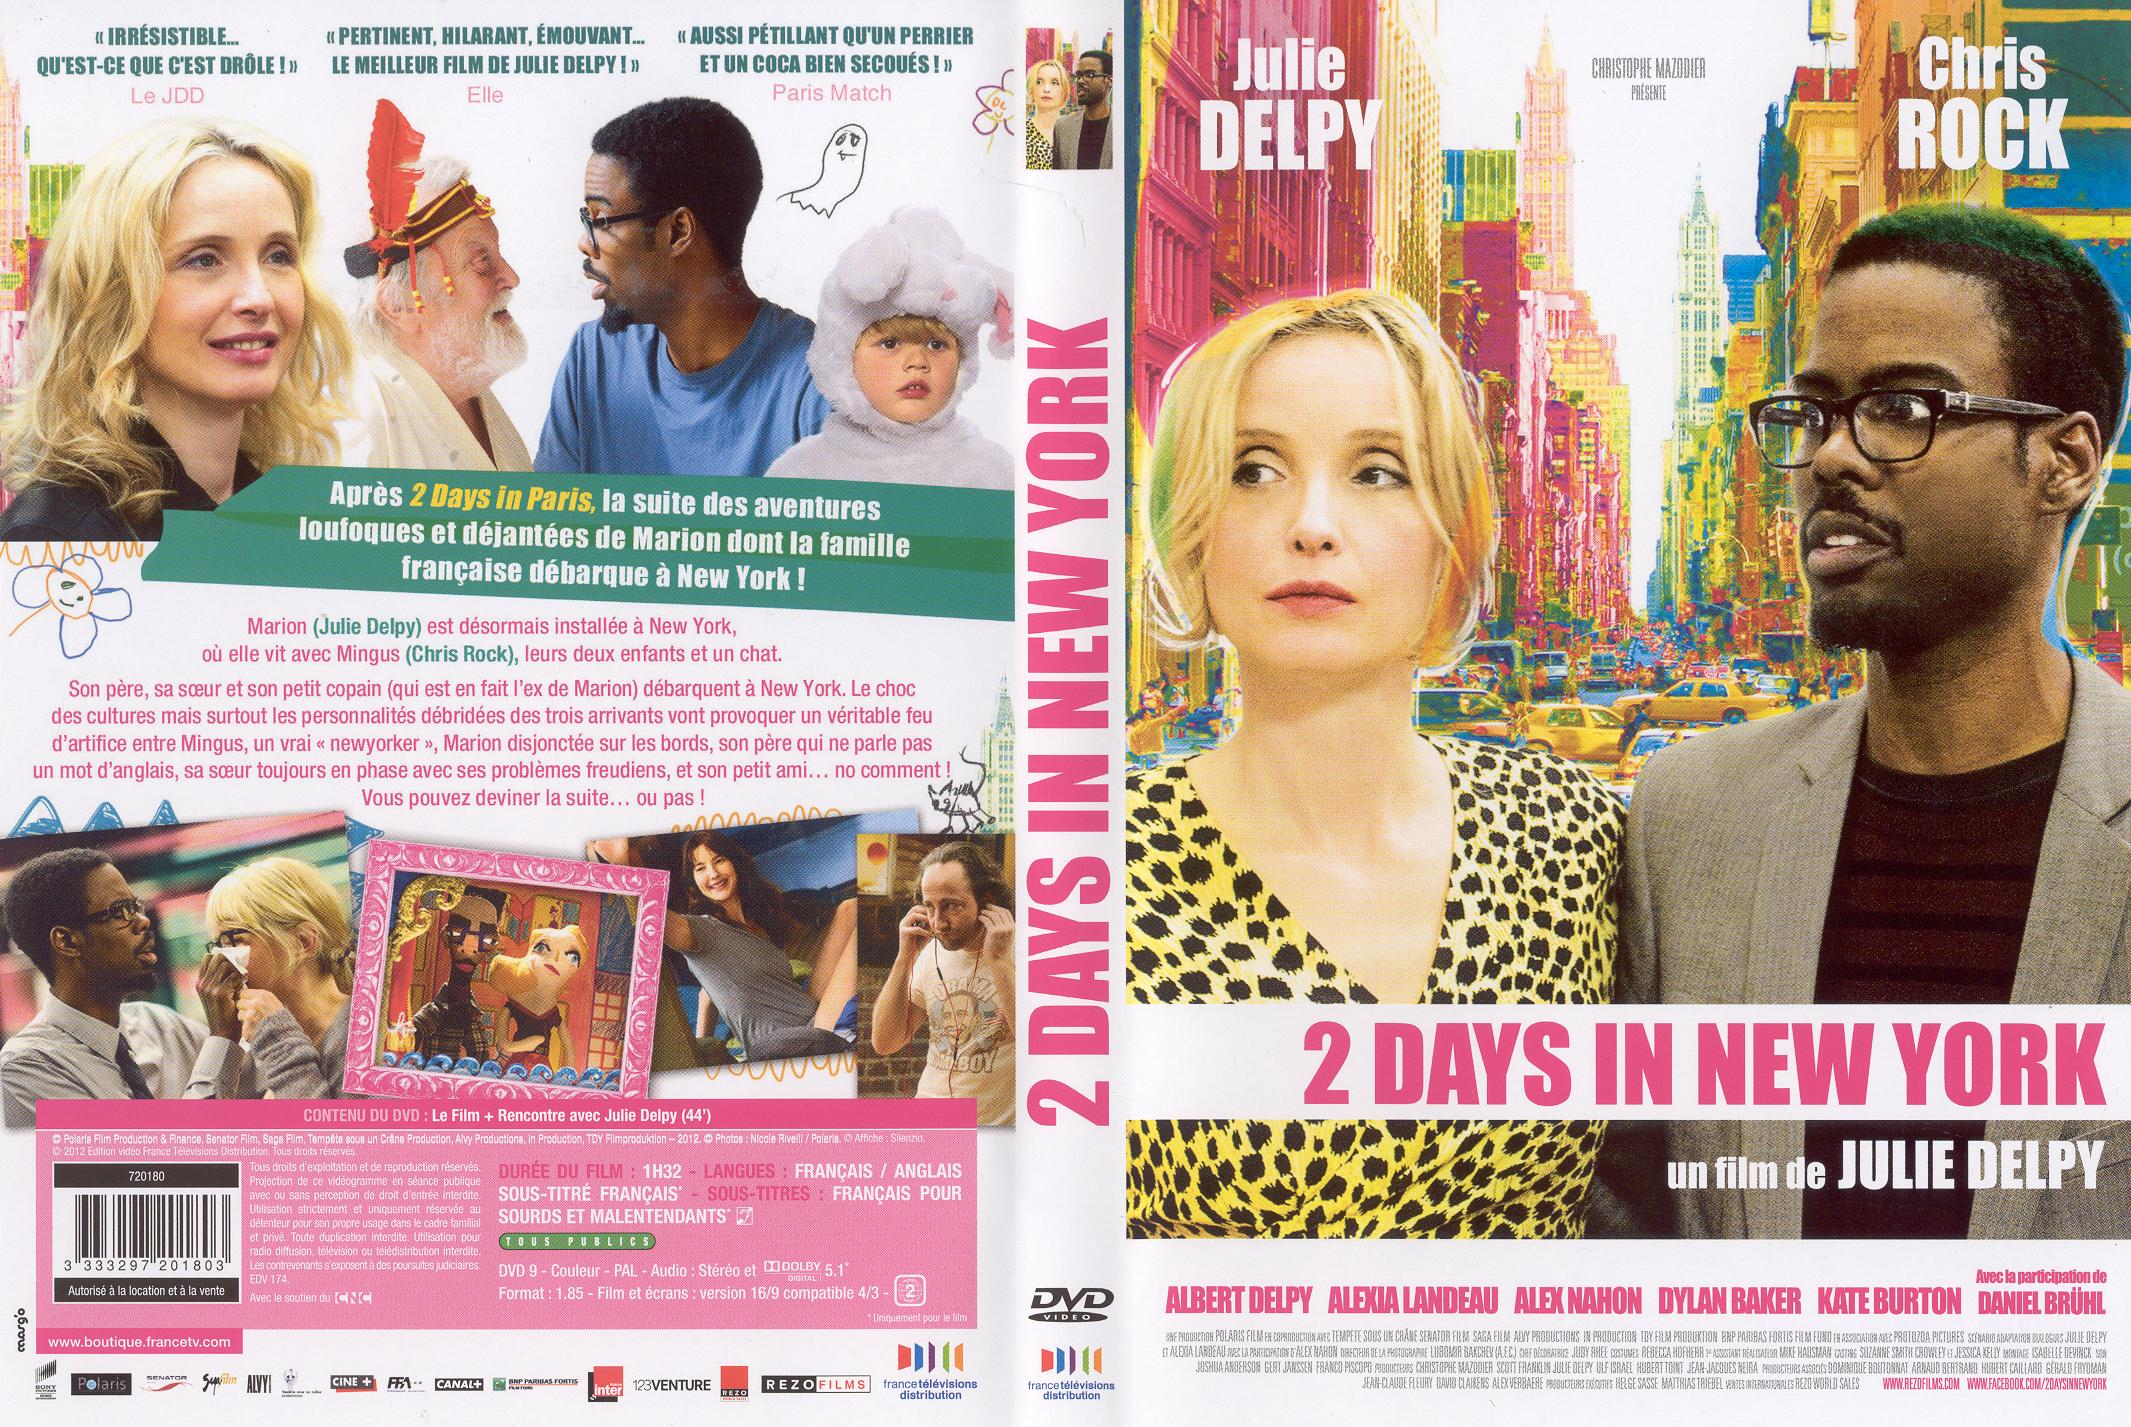 Jaquette DVD 2 Days In New York